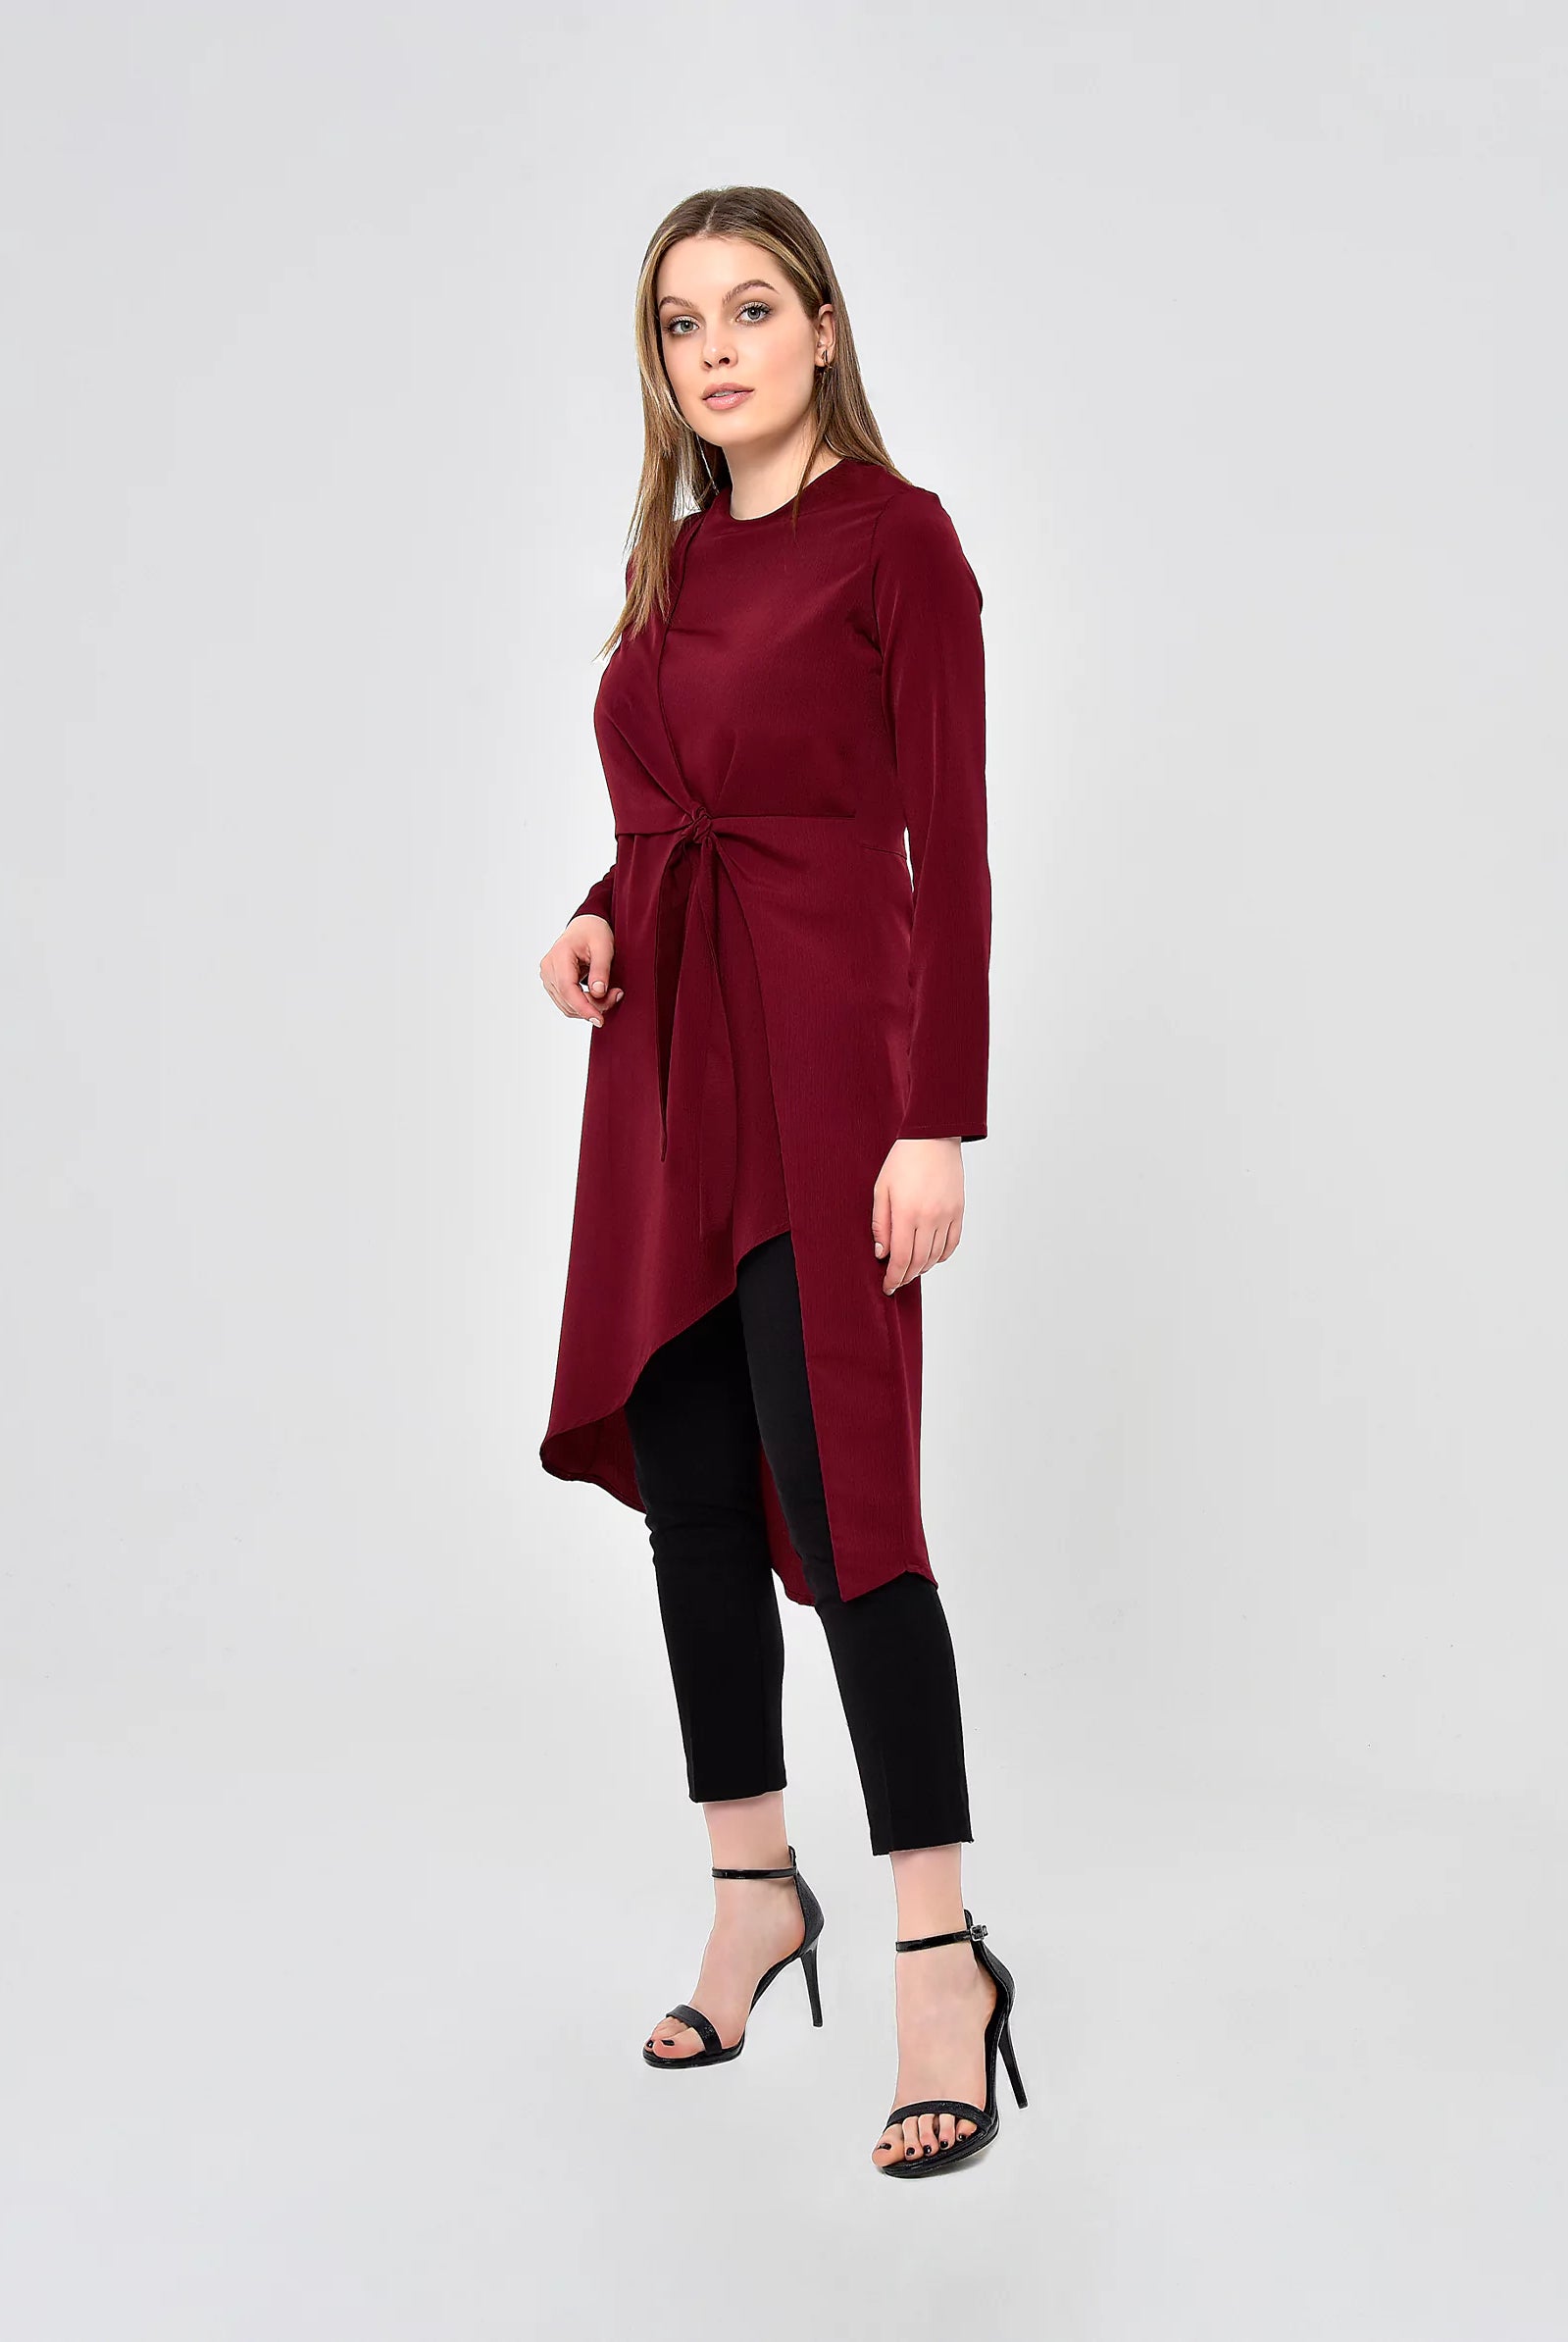 tunic dresses with sleeves